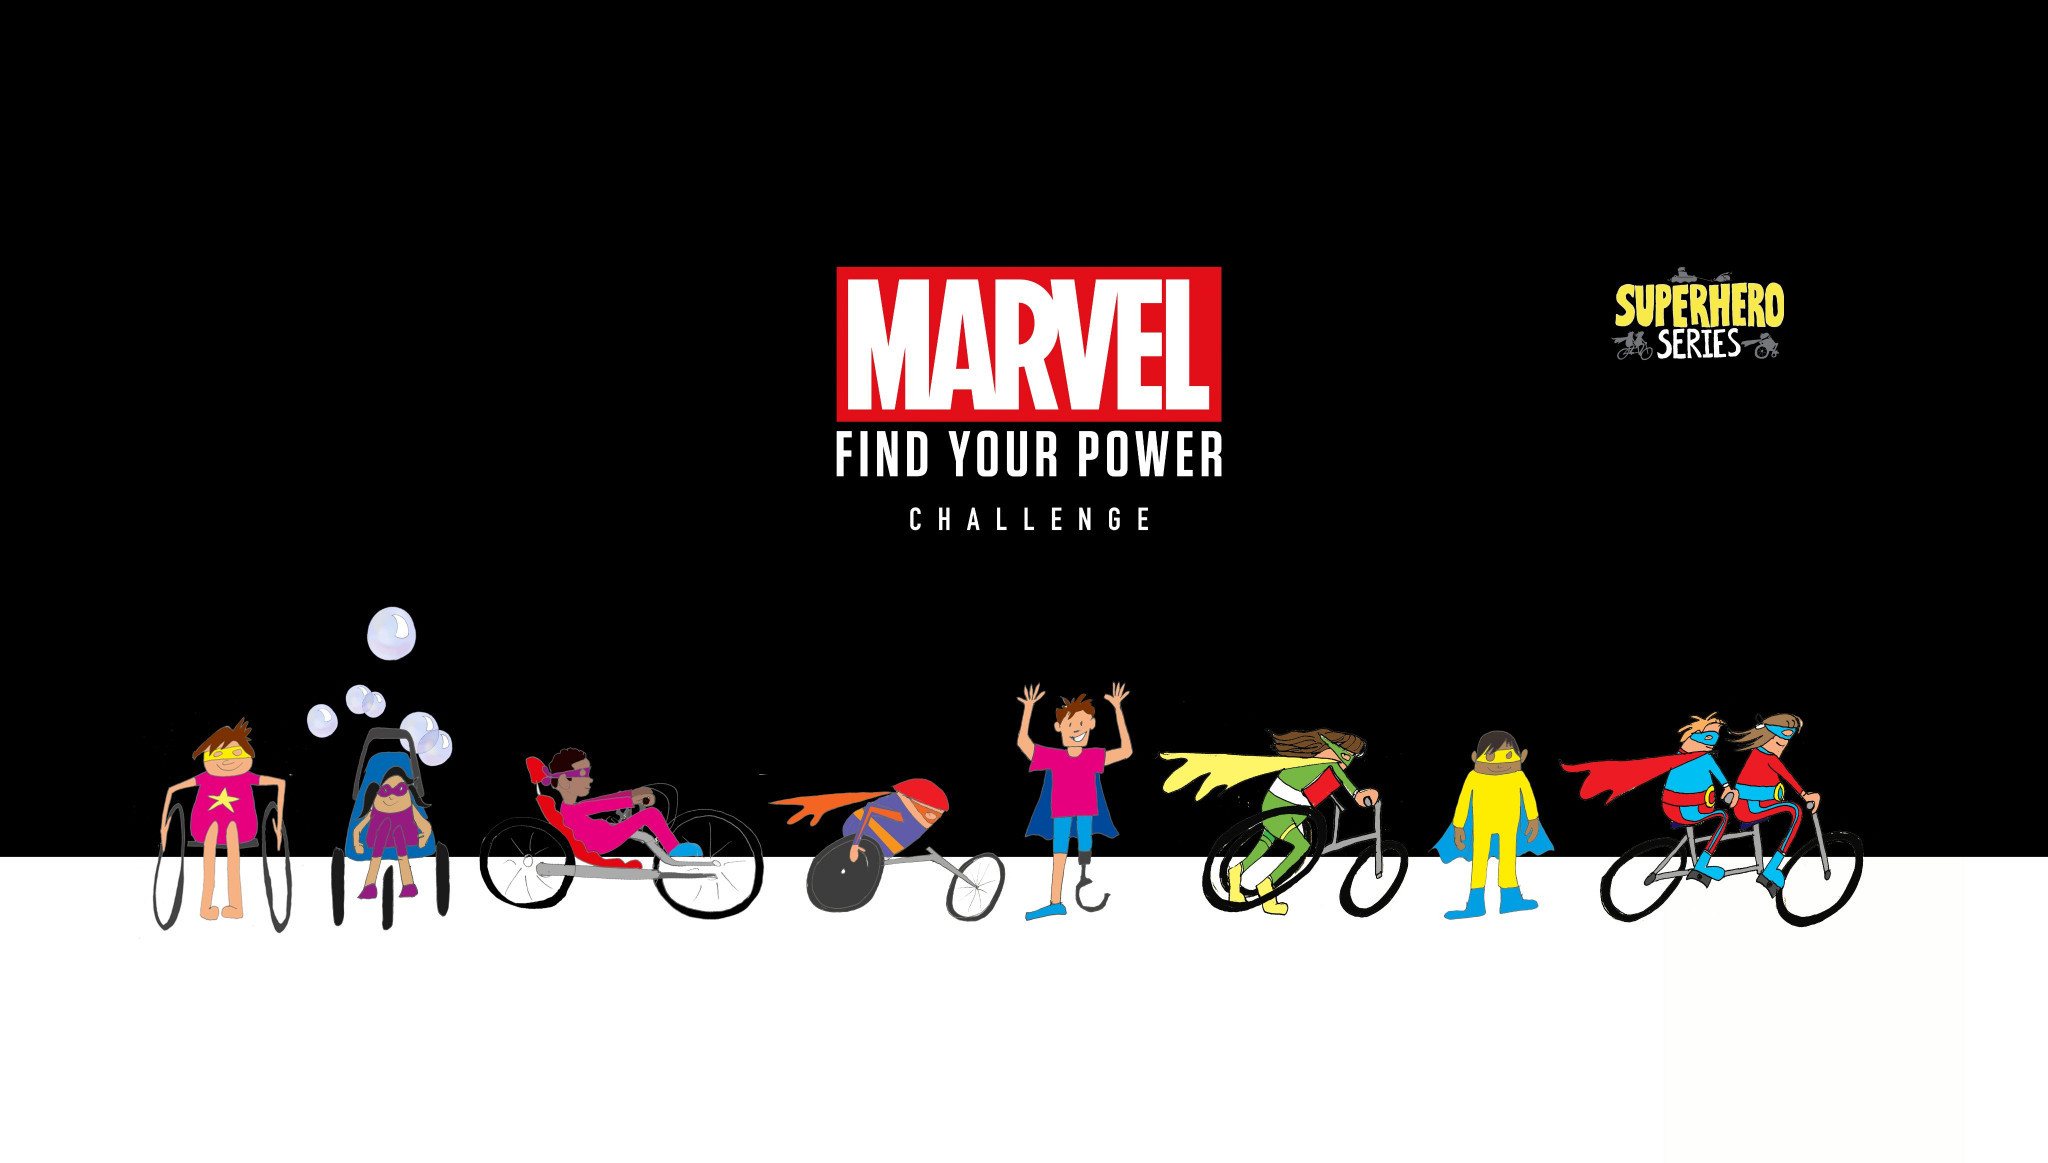 Superhero Series is set to launch its Find Your Power challenge in May and June ©Superhero Series